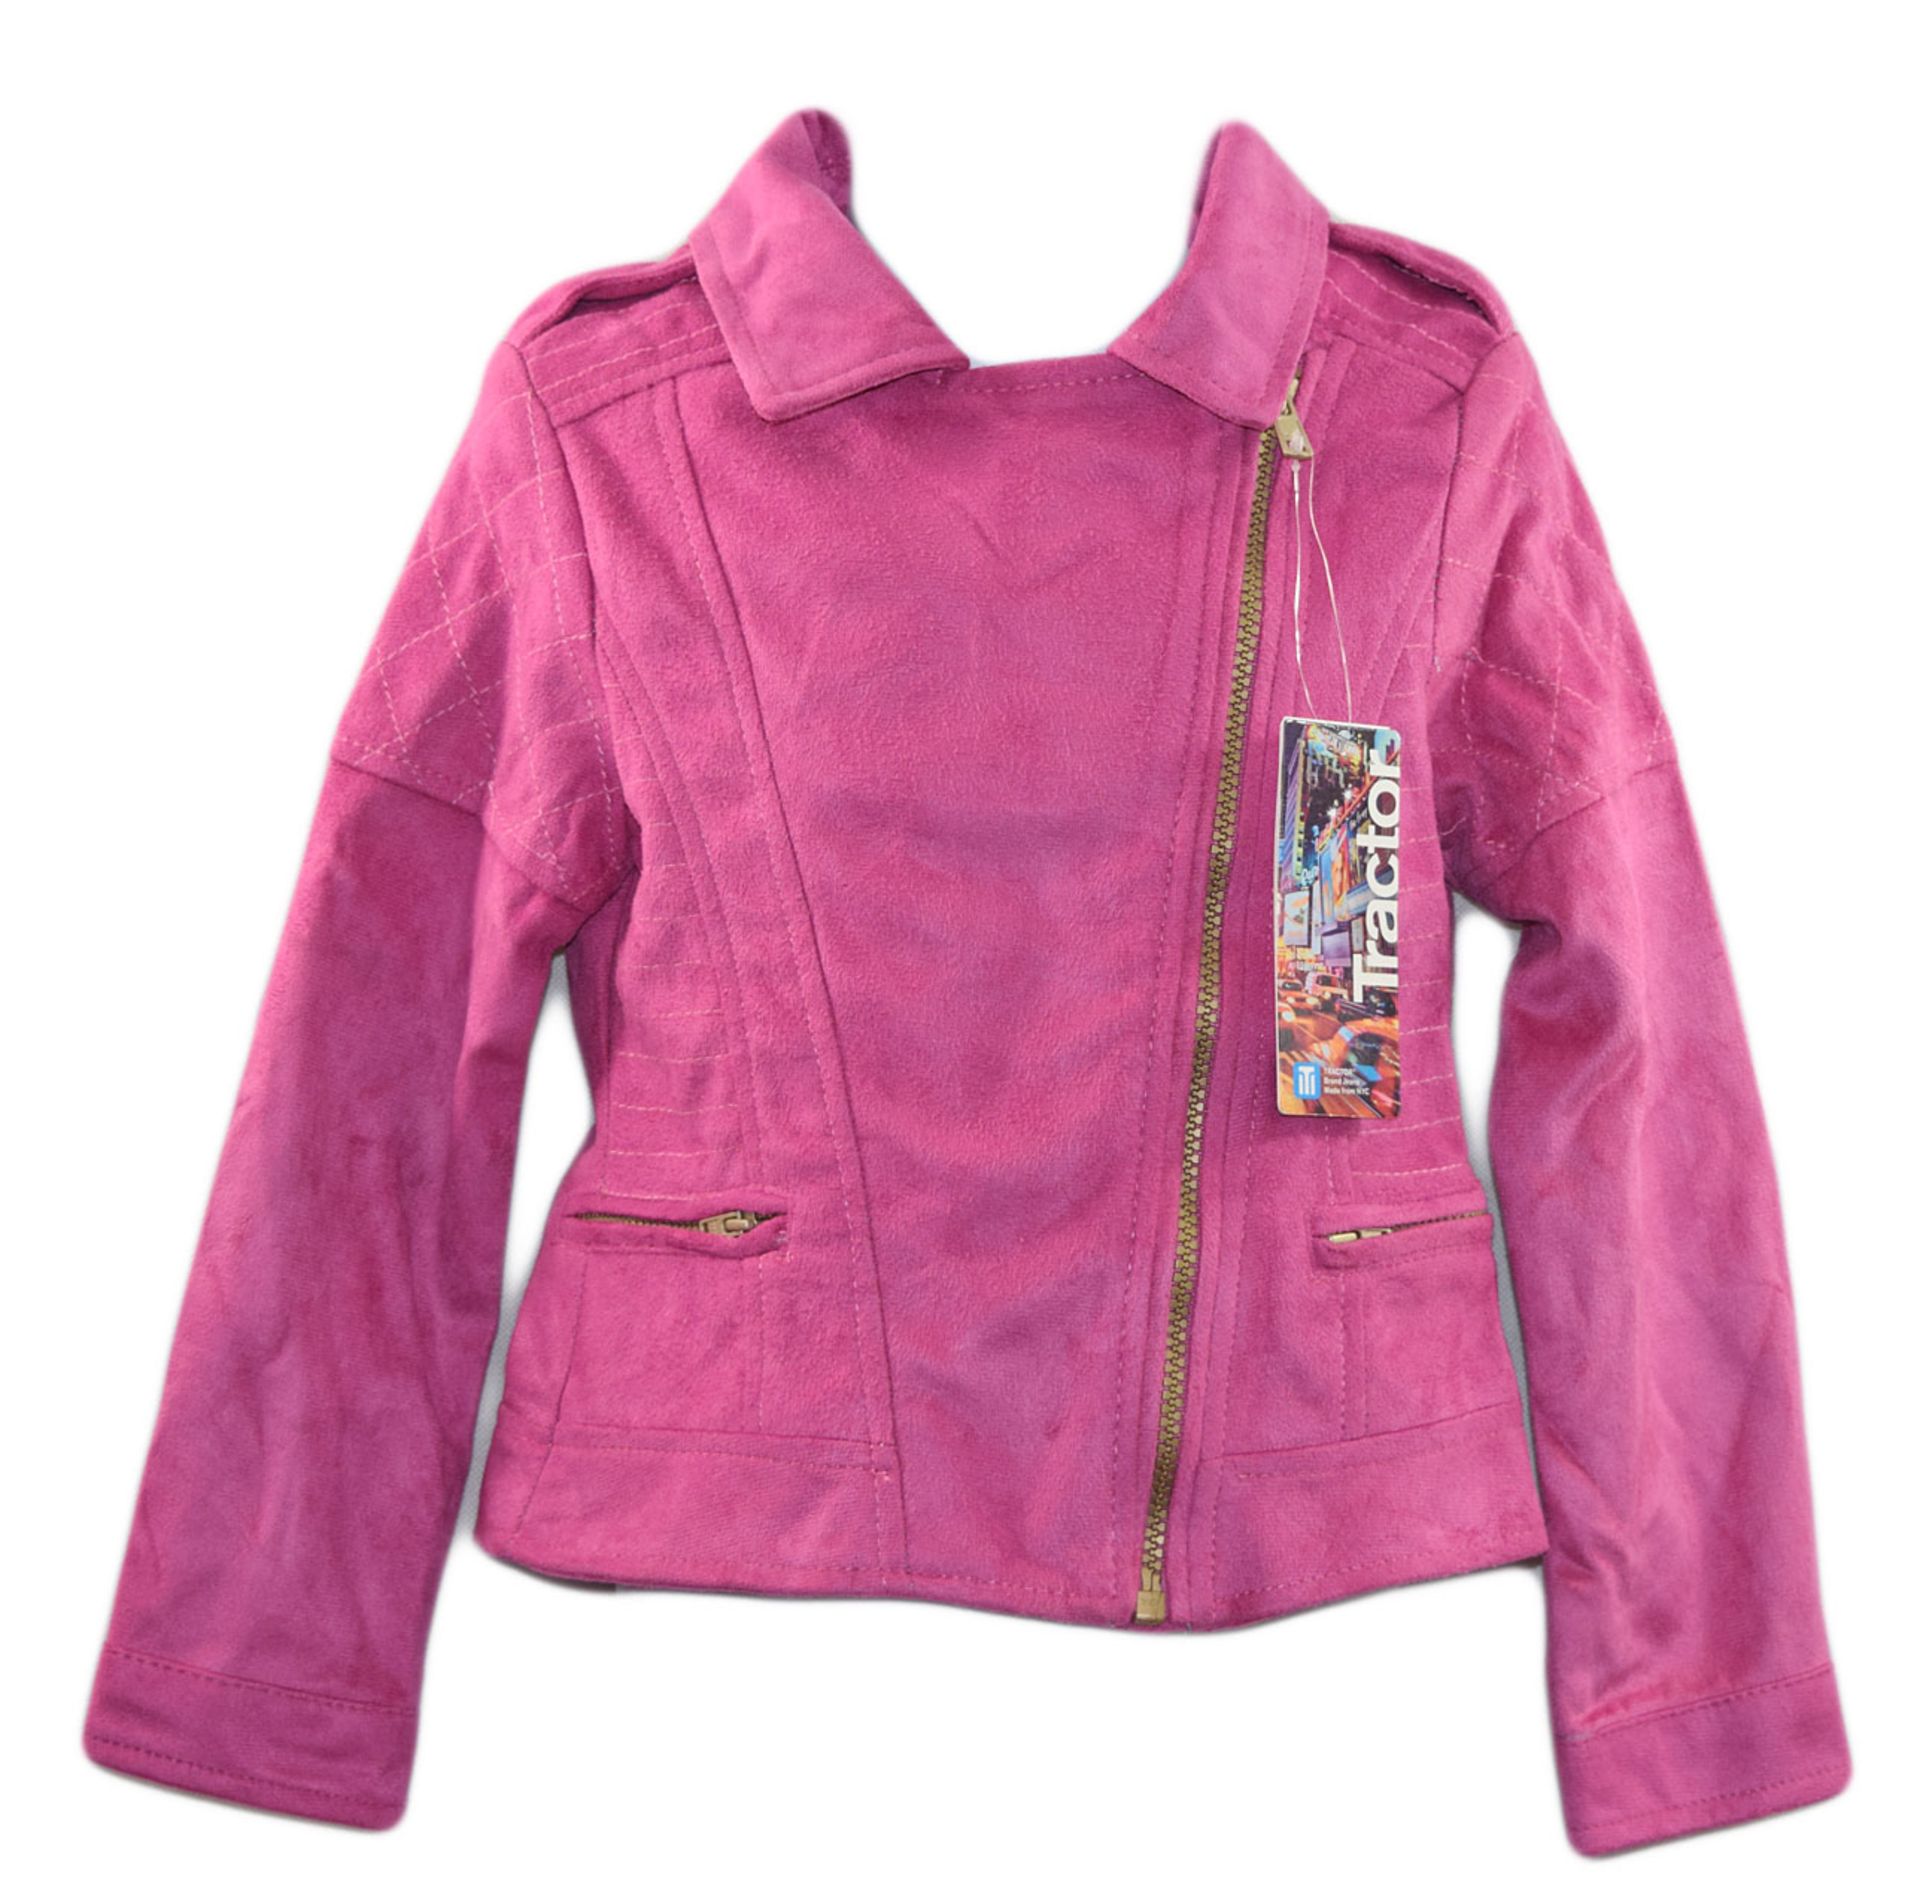 3 x Brand New Girl's Tractor Pink Jacket RRP £60